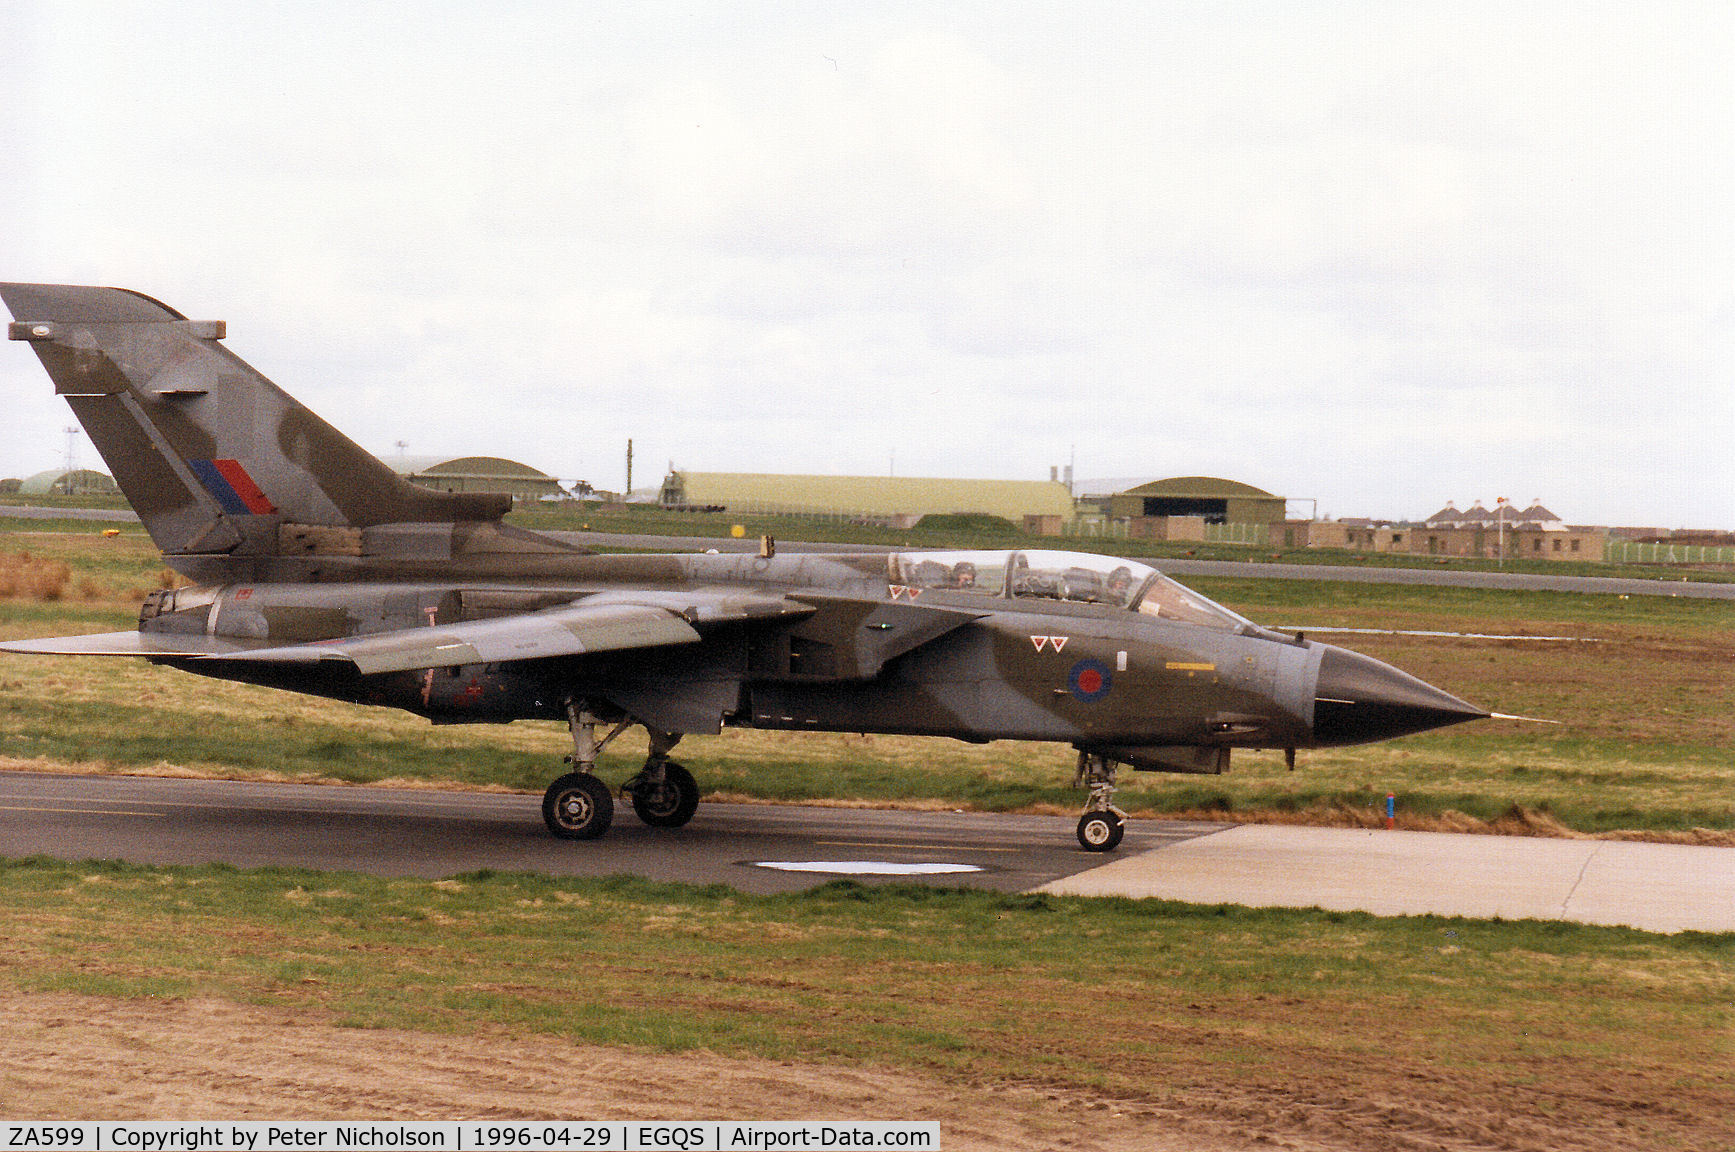 ZA599, 1982 Panavia Tornado GR.1 C/N 120/BT025/3063, Tornado GR.1 of 12 Squadron taxying to Runway 05 at RAF Lossiemouth in April 1996 and wearing traces of the previous unit markings of the Tri-National Tornado Training Establishment on the fin.